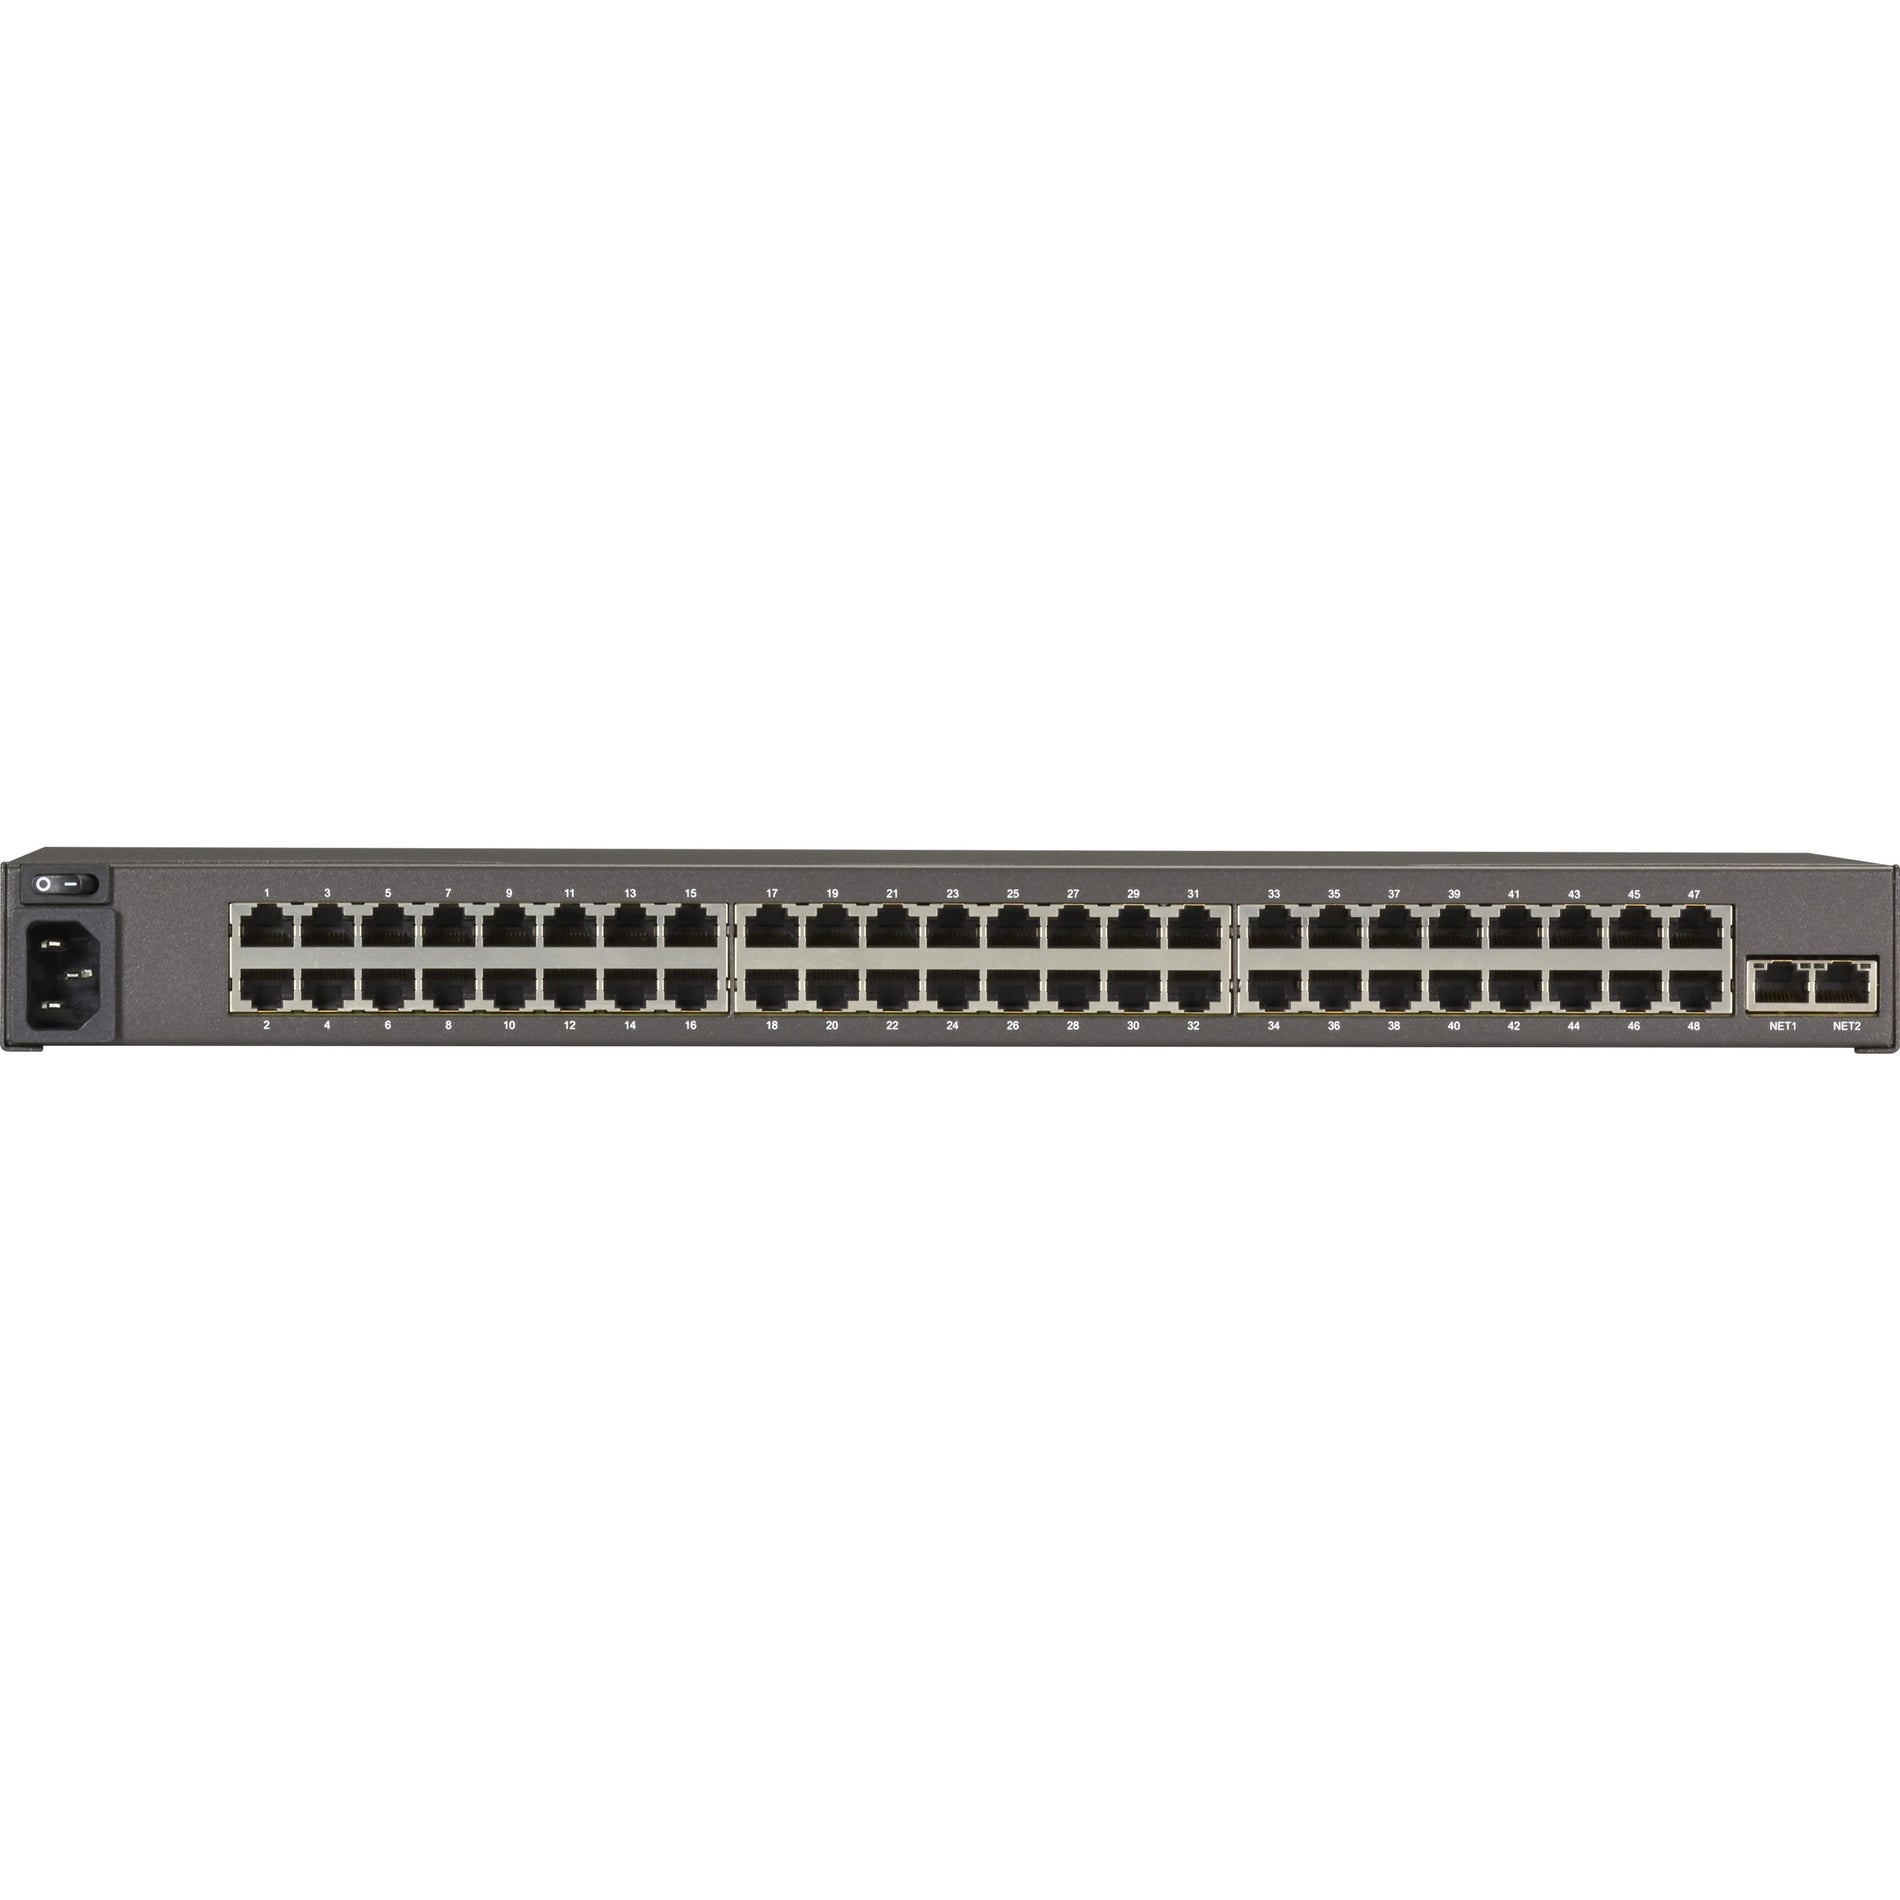 Black Box LES1548A LES1500 Device Server, 48-Port Secure Serial Server with Cisco Pinout, Rackmount brackets and hardware, 4 Year Limited Warranty